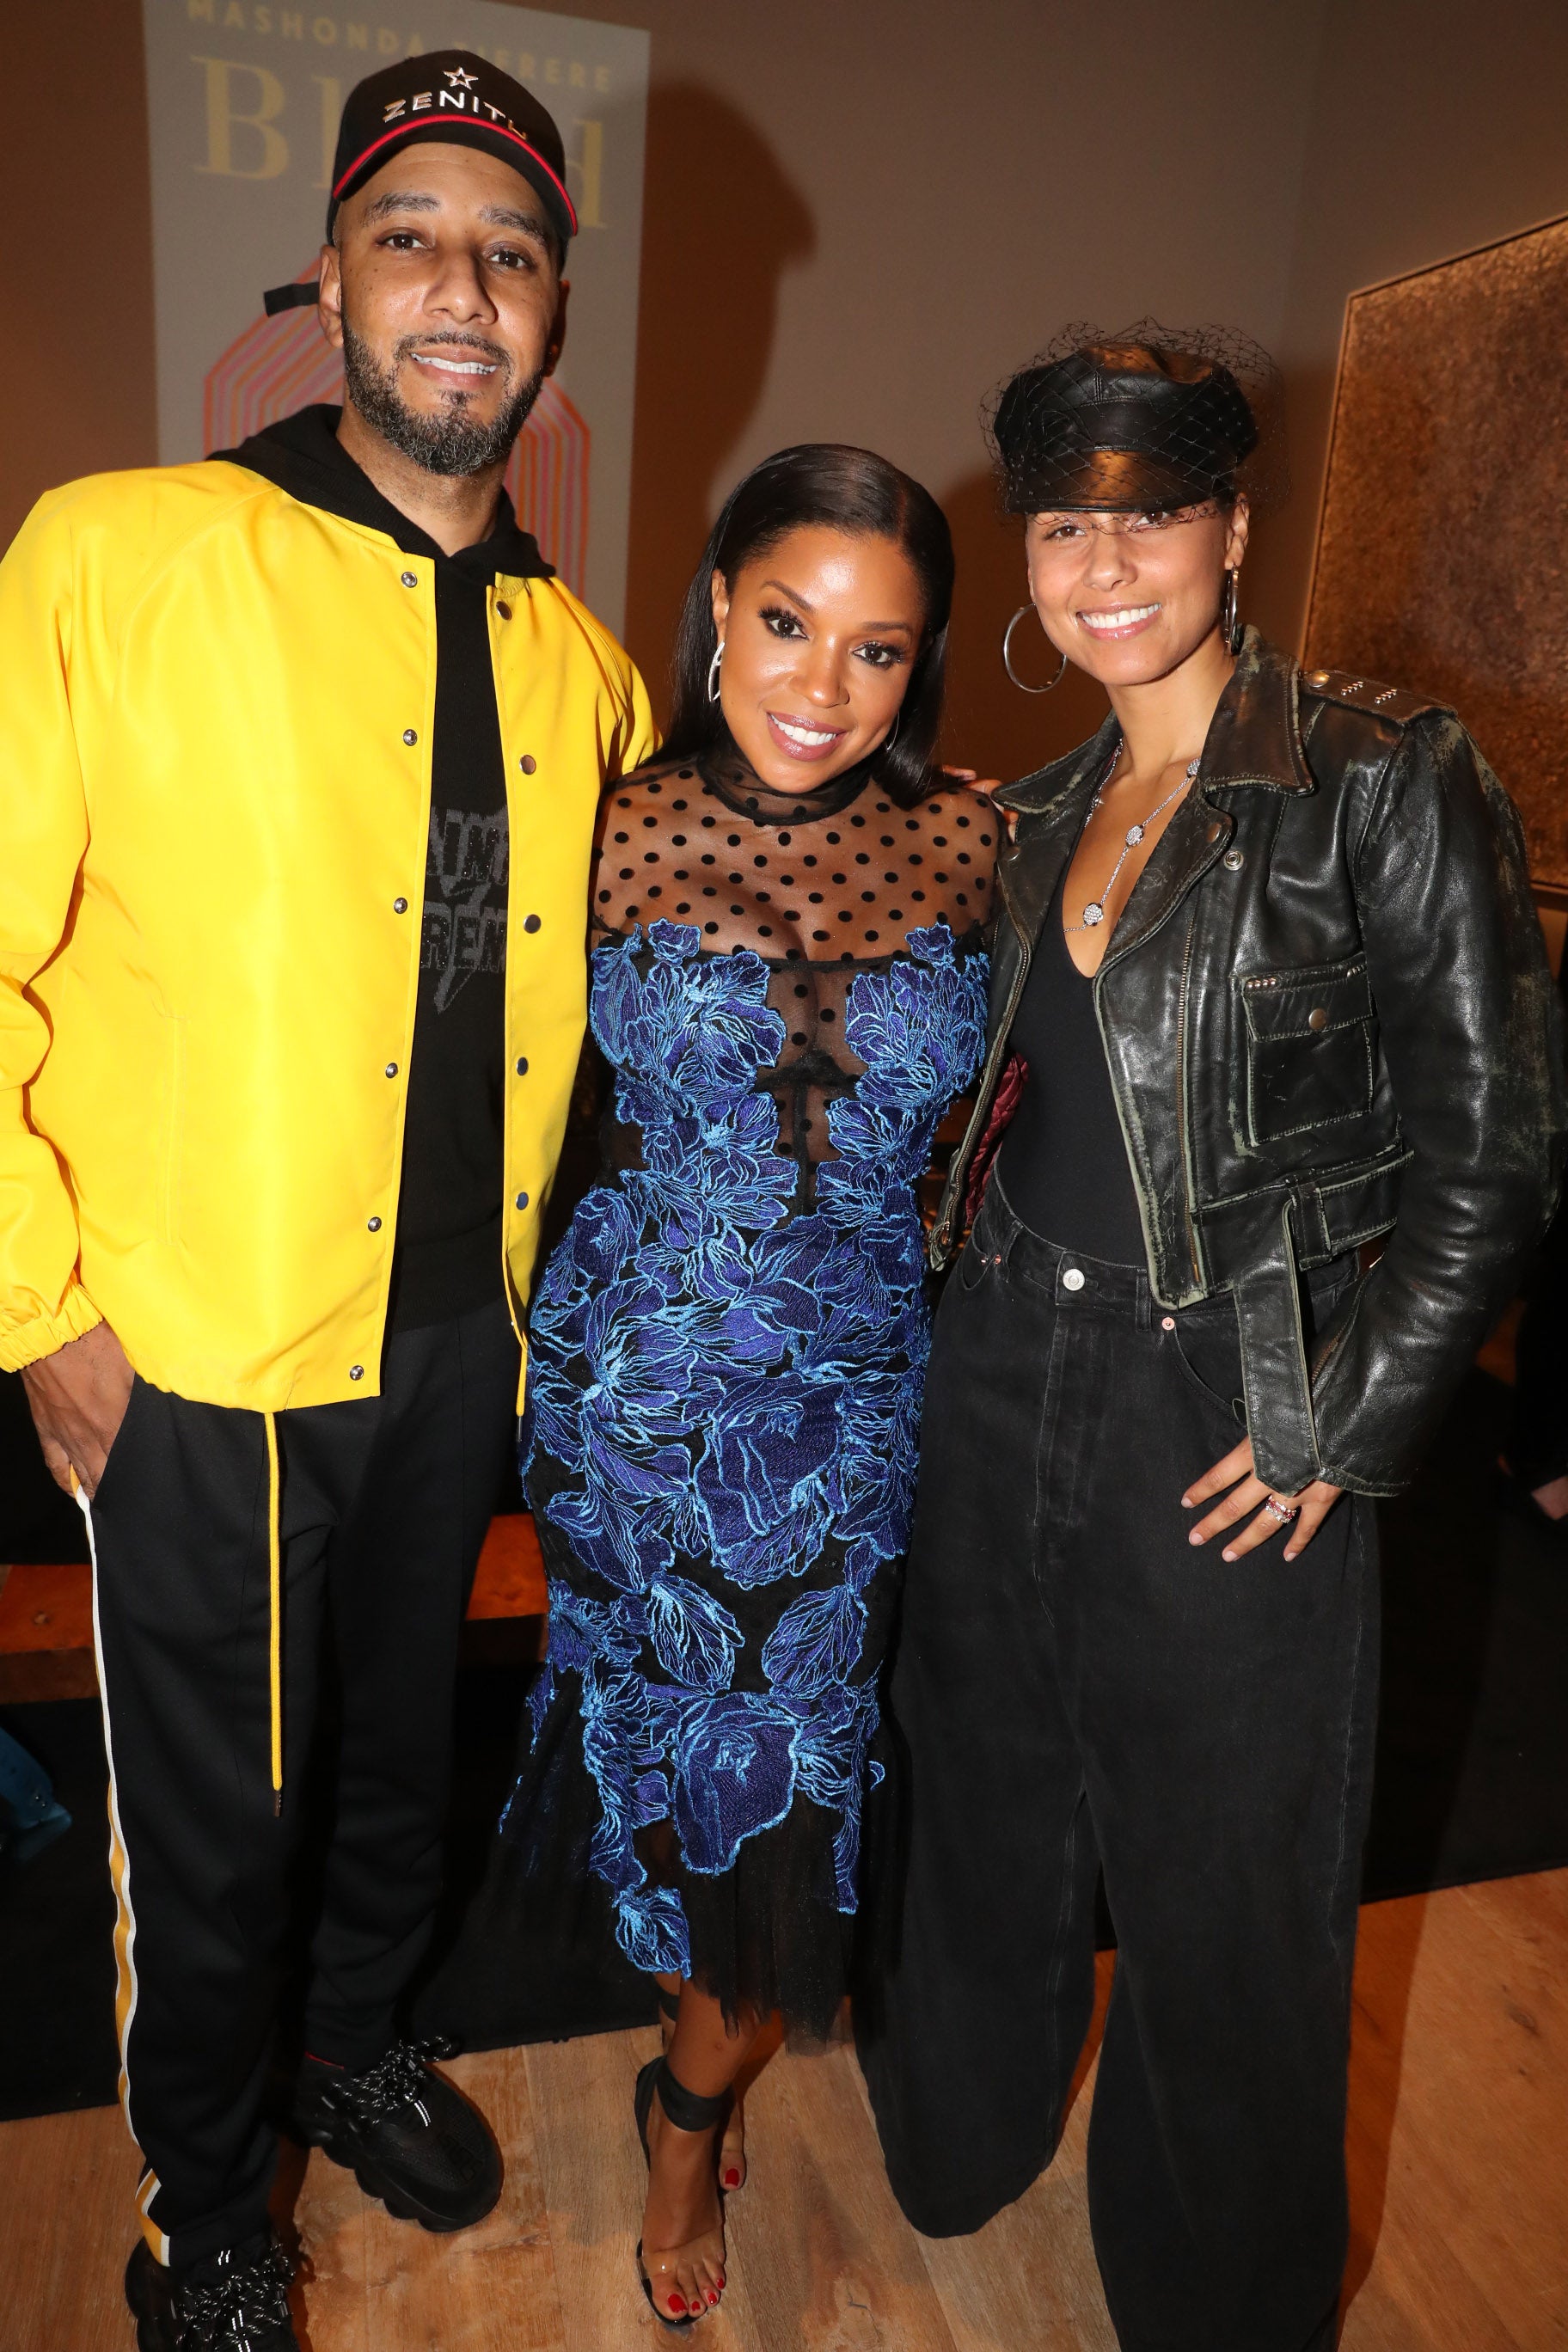 Swizz Beatz, Mashonda Tifrere, Alicia Keys, and More Celebs Out and About